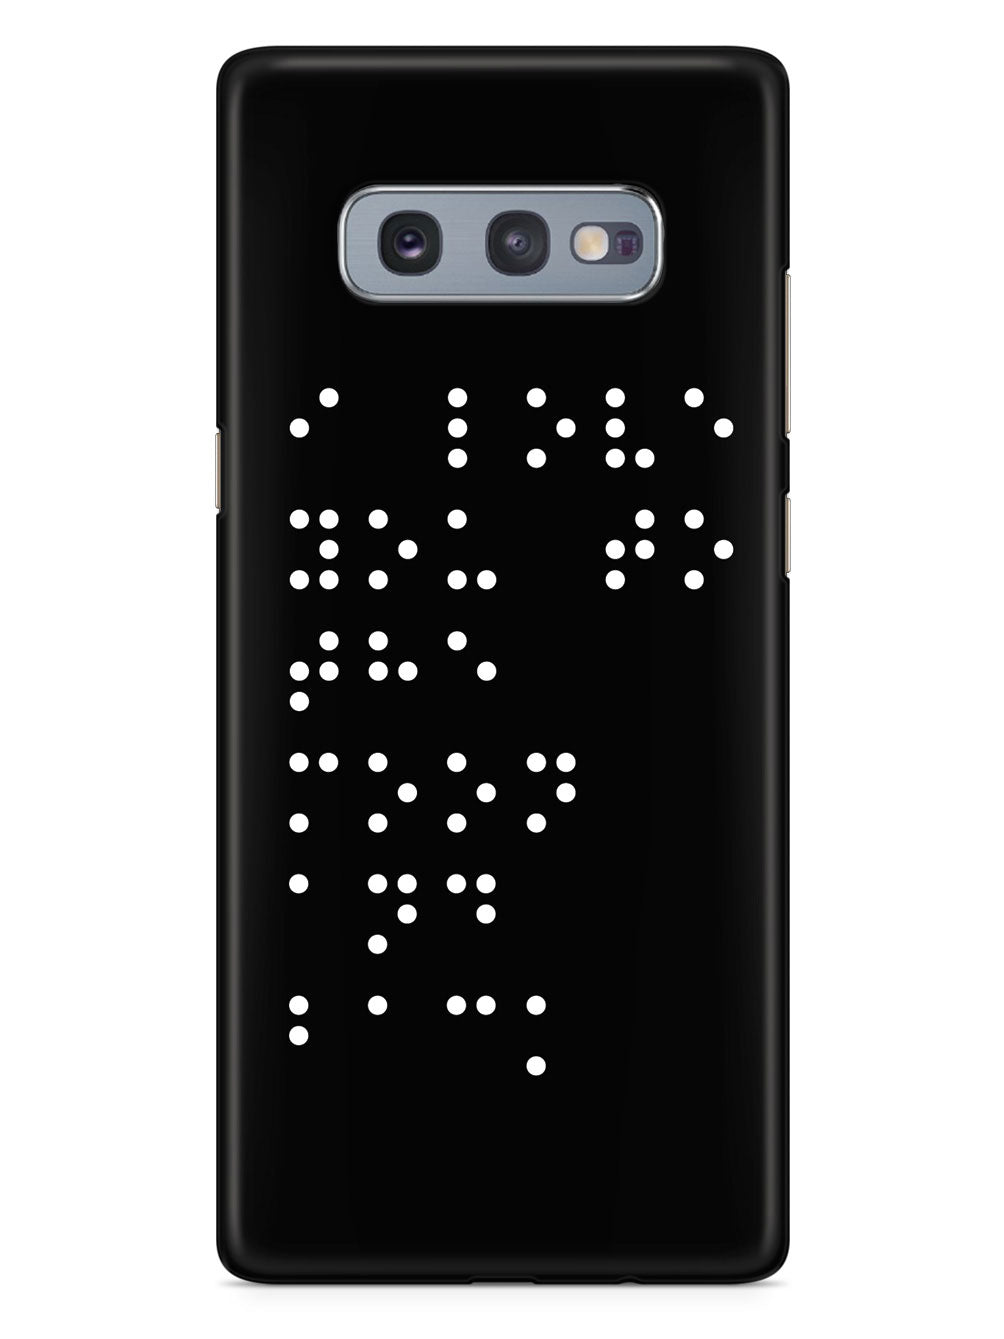 I Love You To The Moon and Back - Braille - Black Case